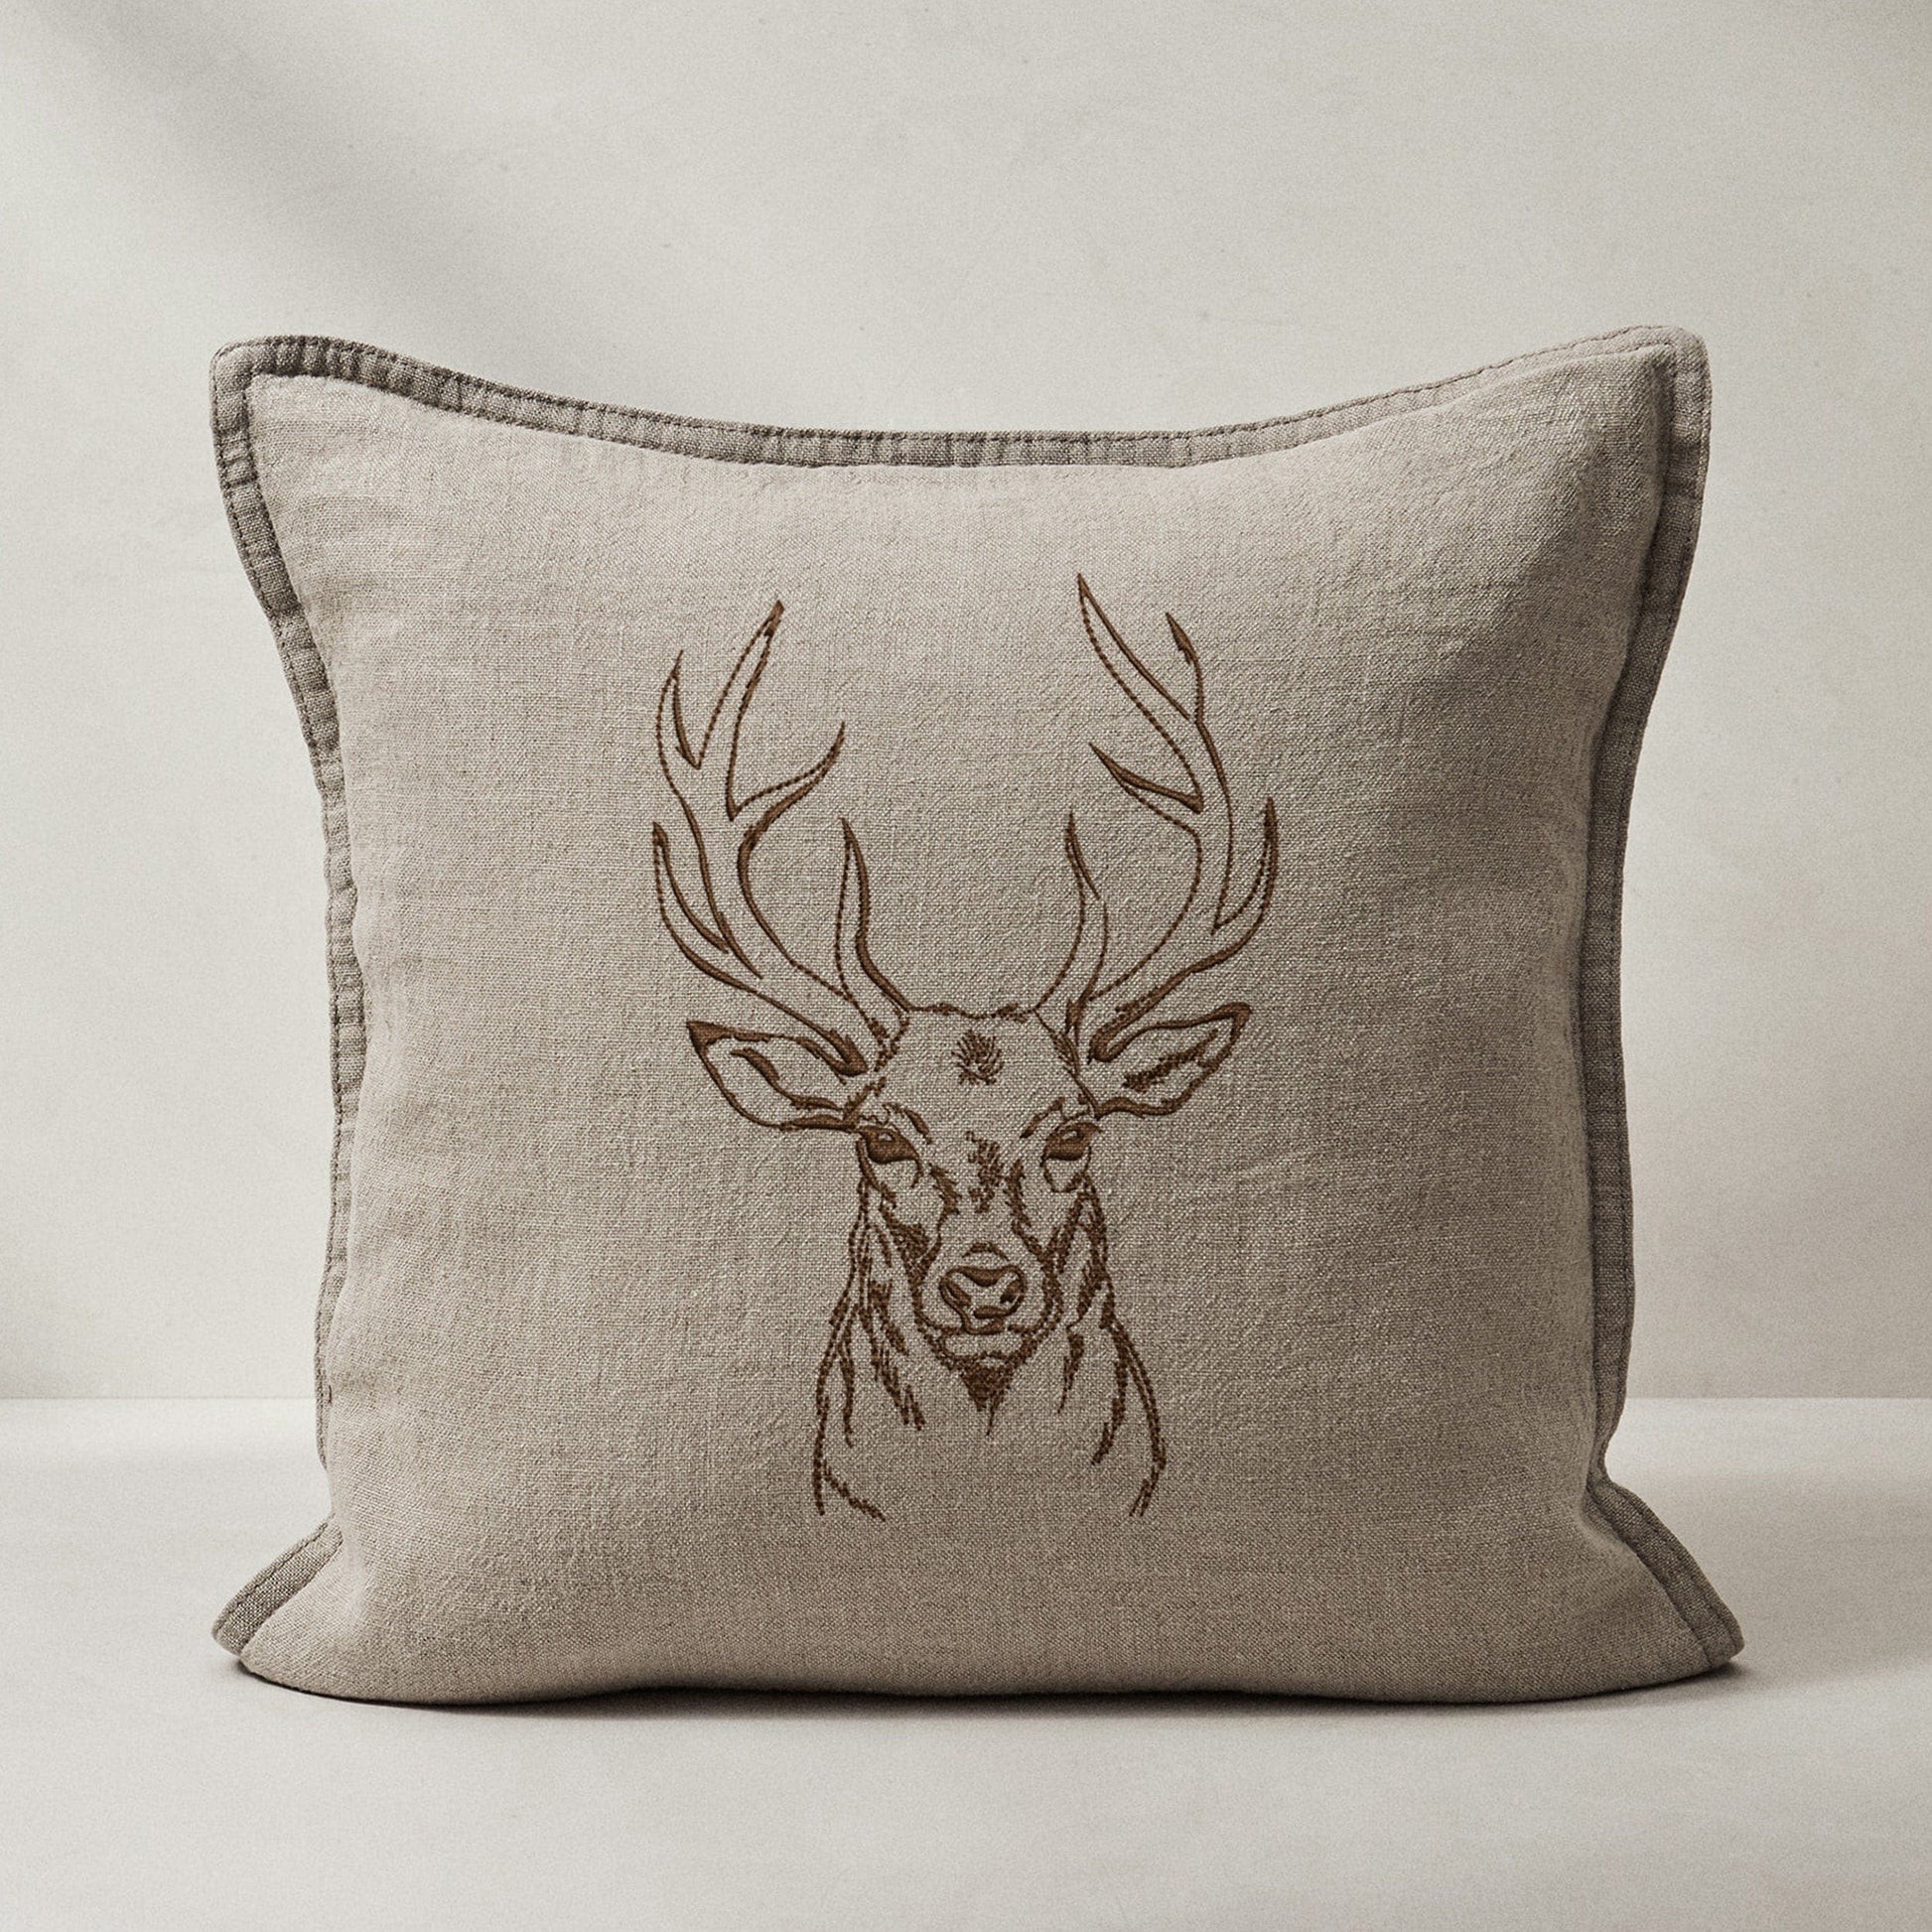 Deer Stag Machine Embroidery Design on pillow